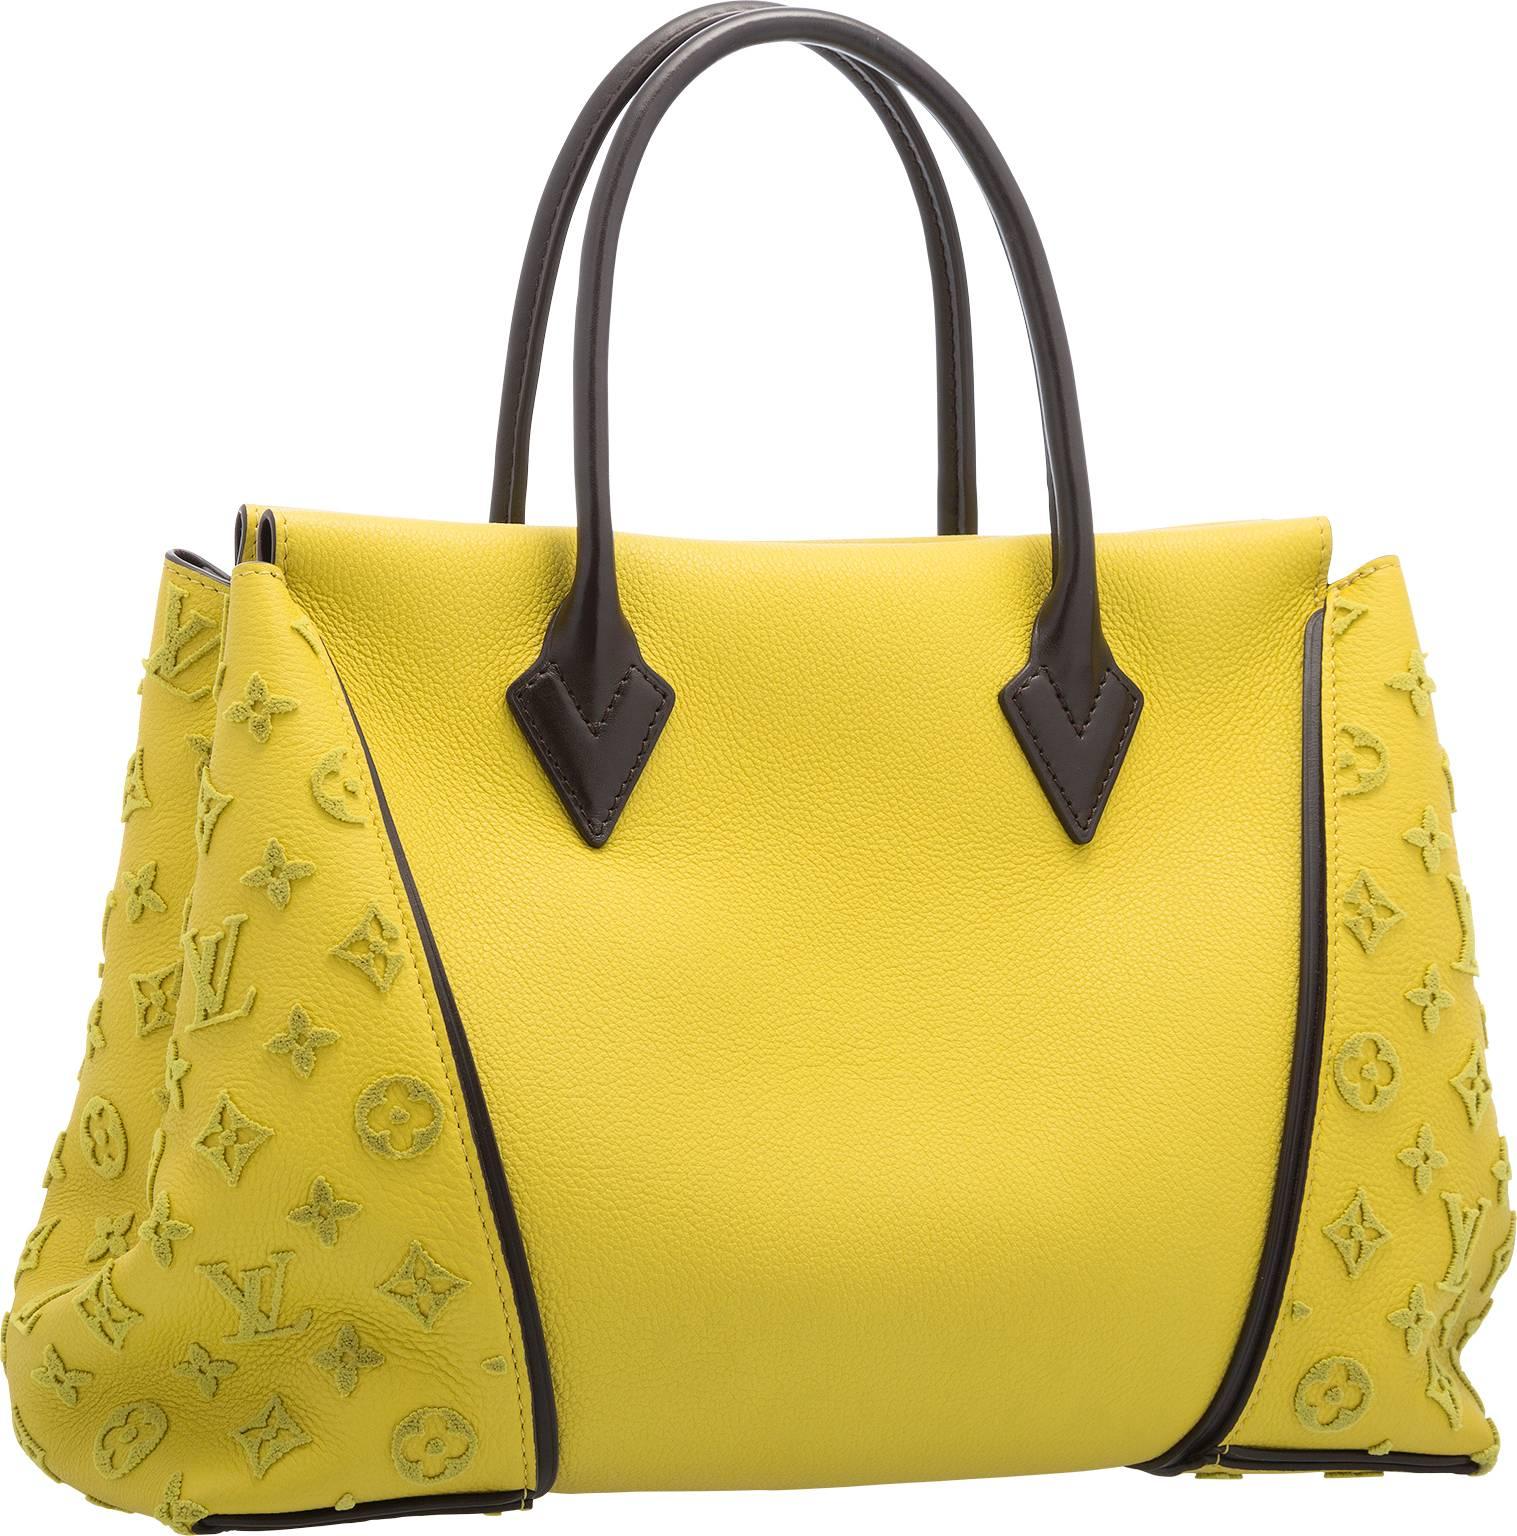 Chic, on trend, and fabulous, the W Bag from Louis Vuitton is an impressive combination of their most luxurious leathers available. This bag is done in supple yellow and brown leather, featuring matching yellow monogram tuffetage side detail. This